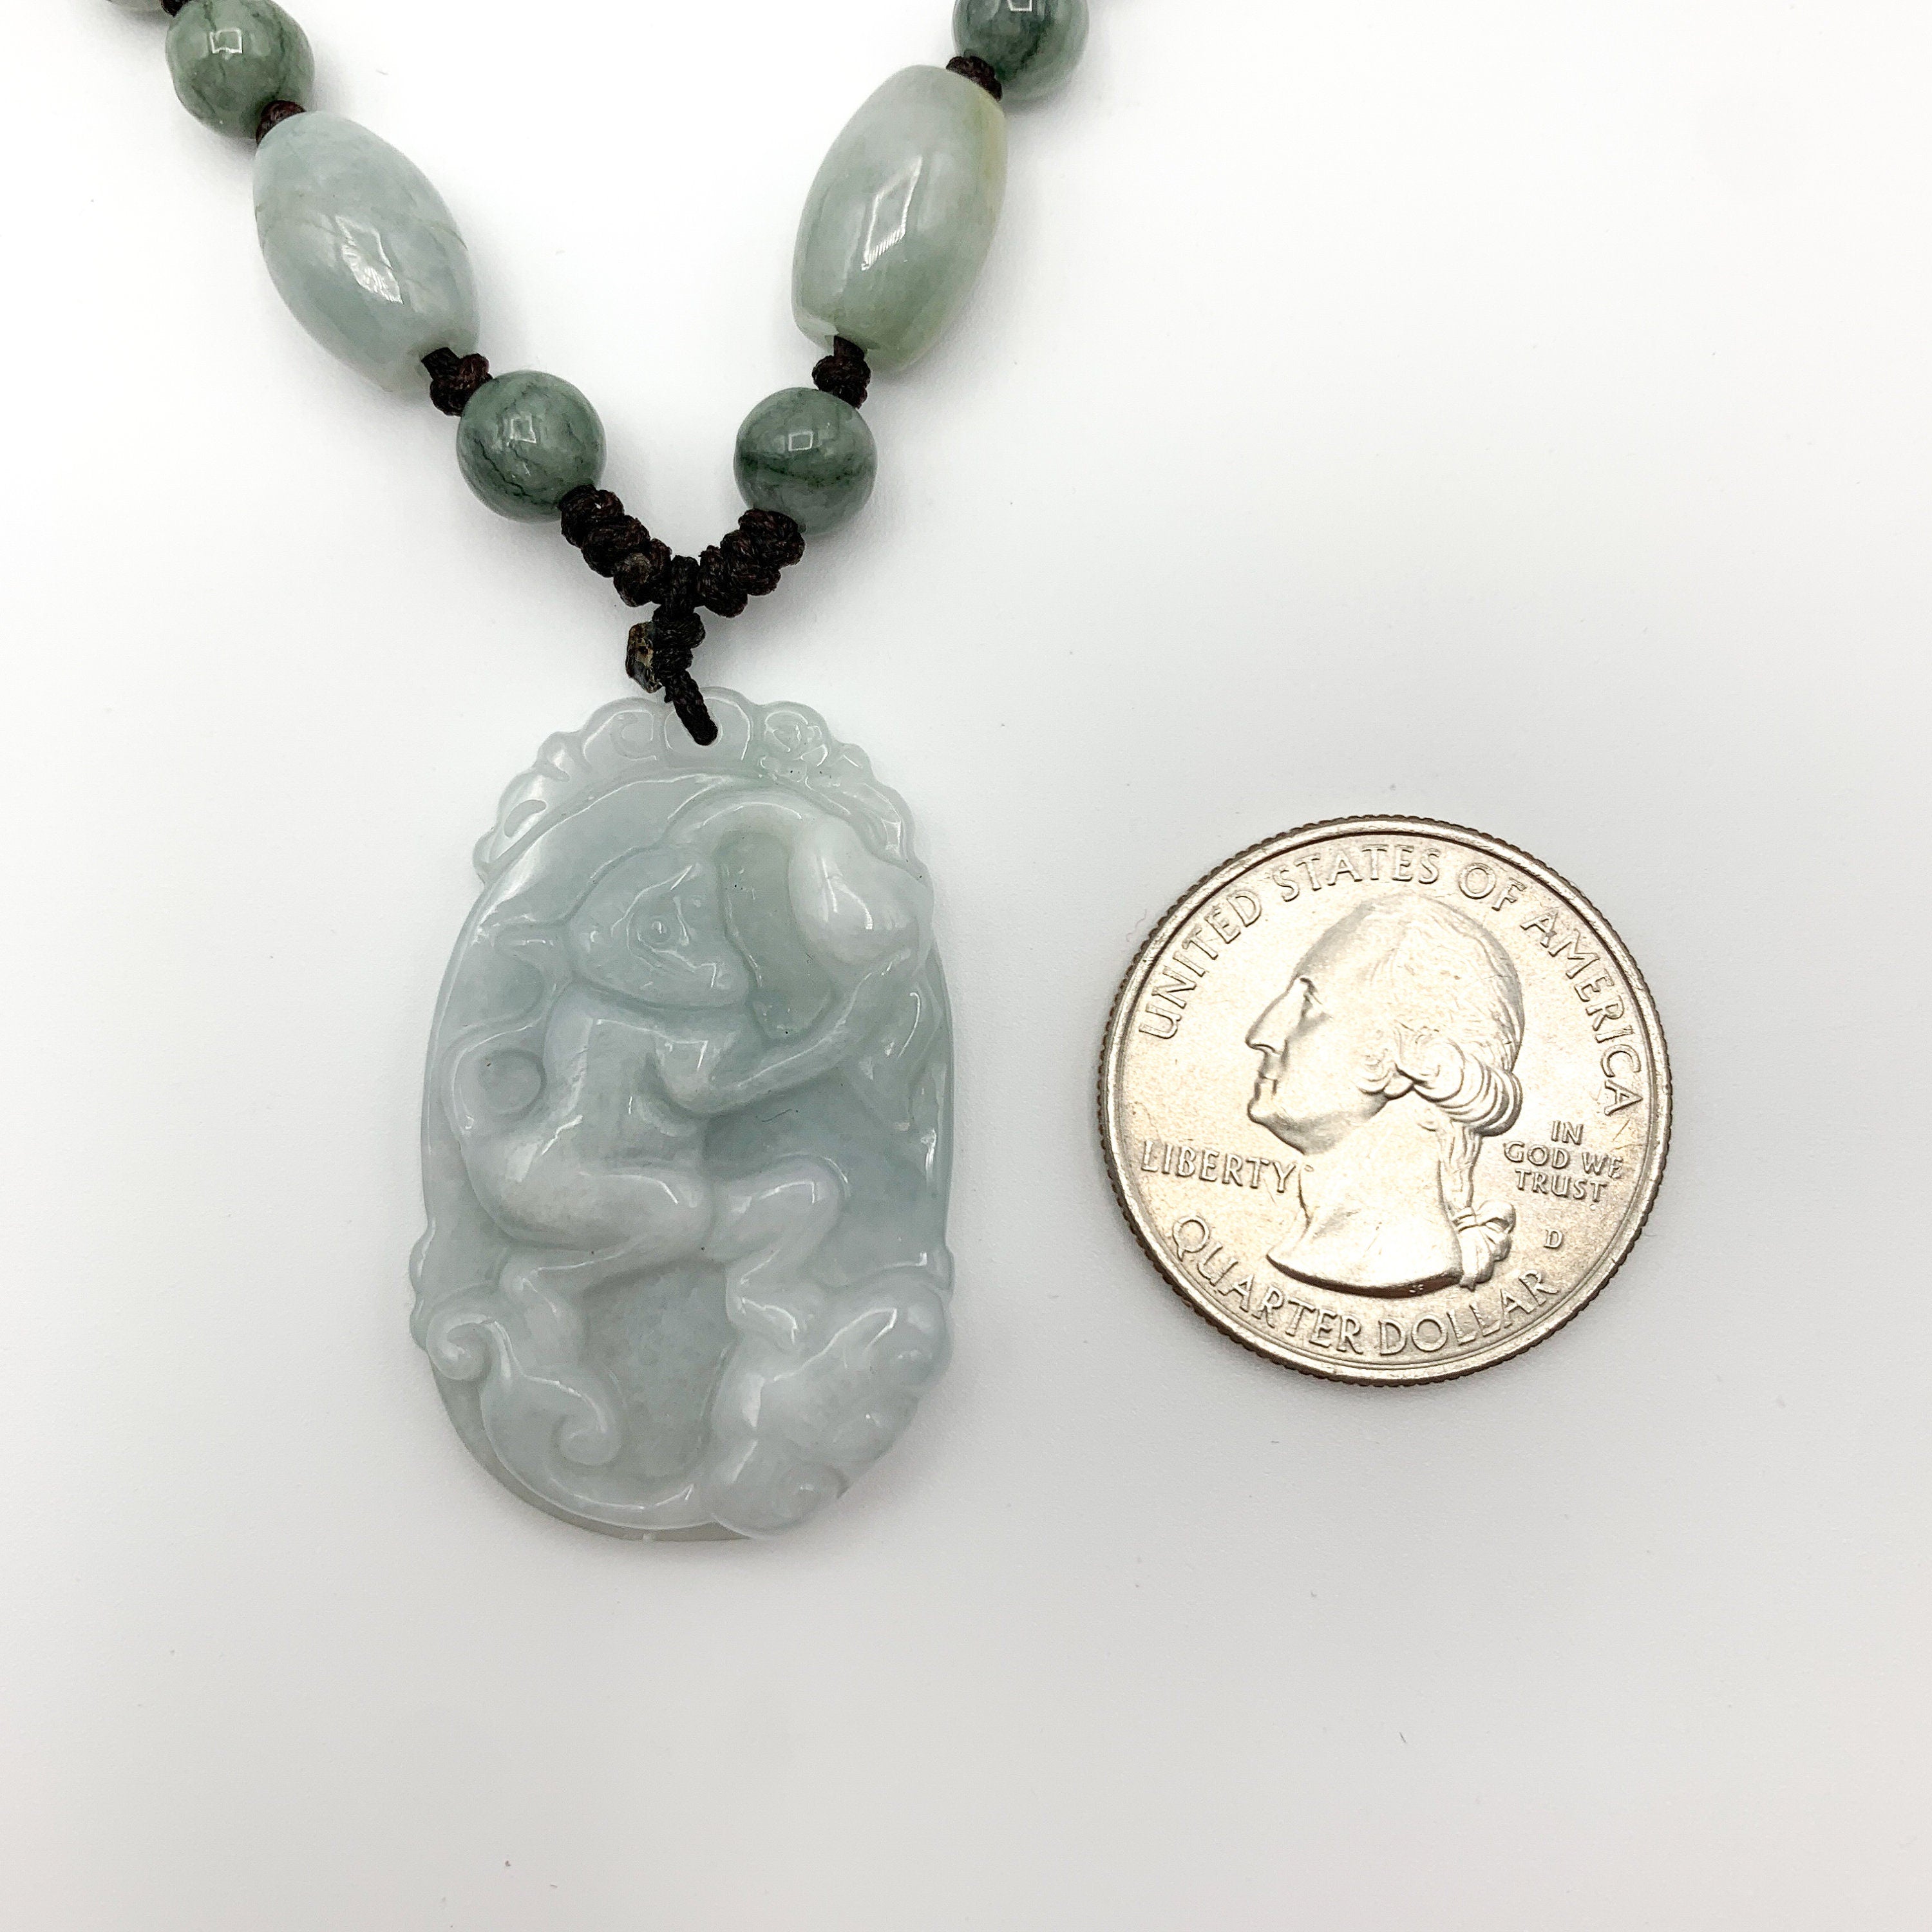 At Auction: 10K Yellow Gold & Chinese Jade Pendant Necklace